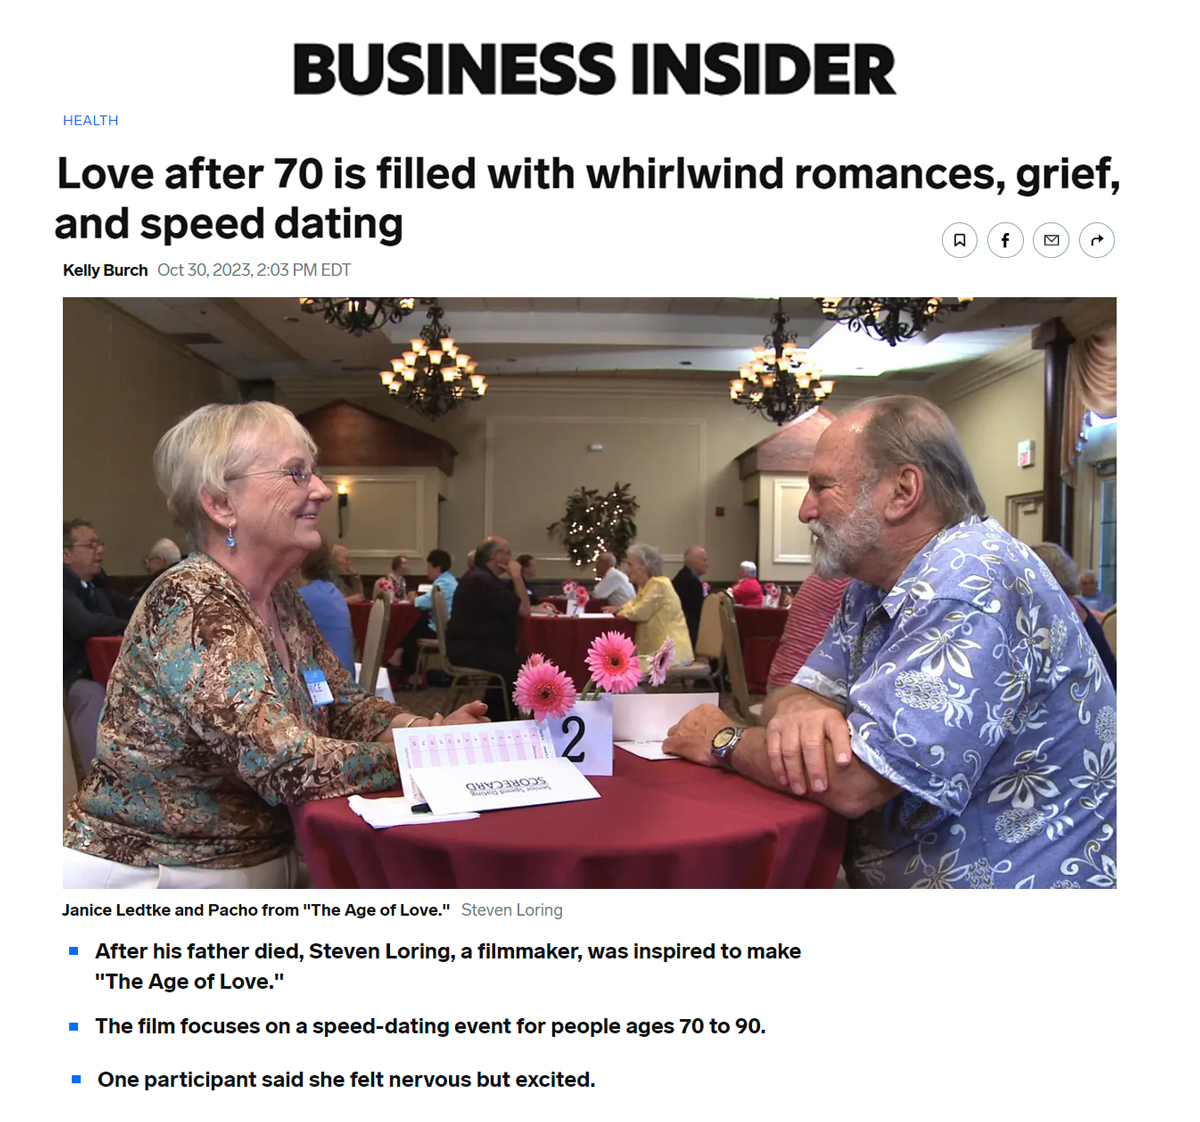 Love after 70 is filled with whirlwind romances, grief, and speed dating